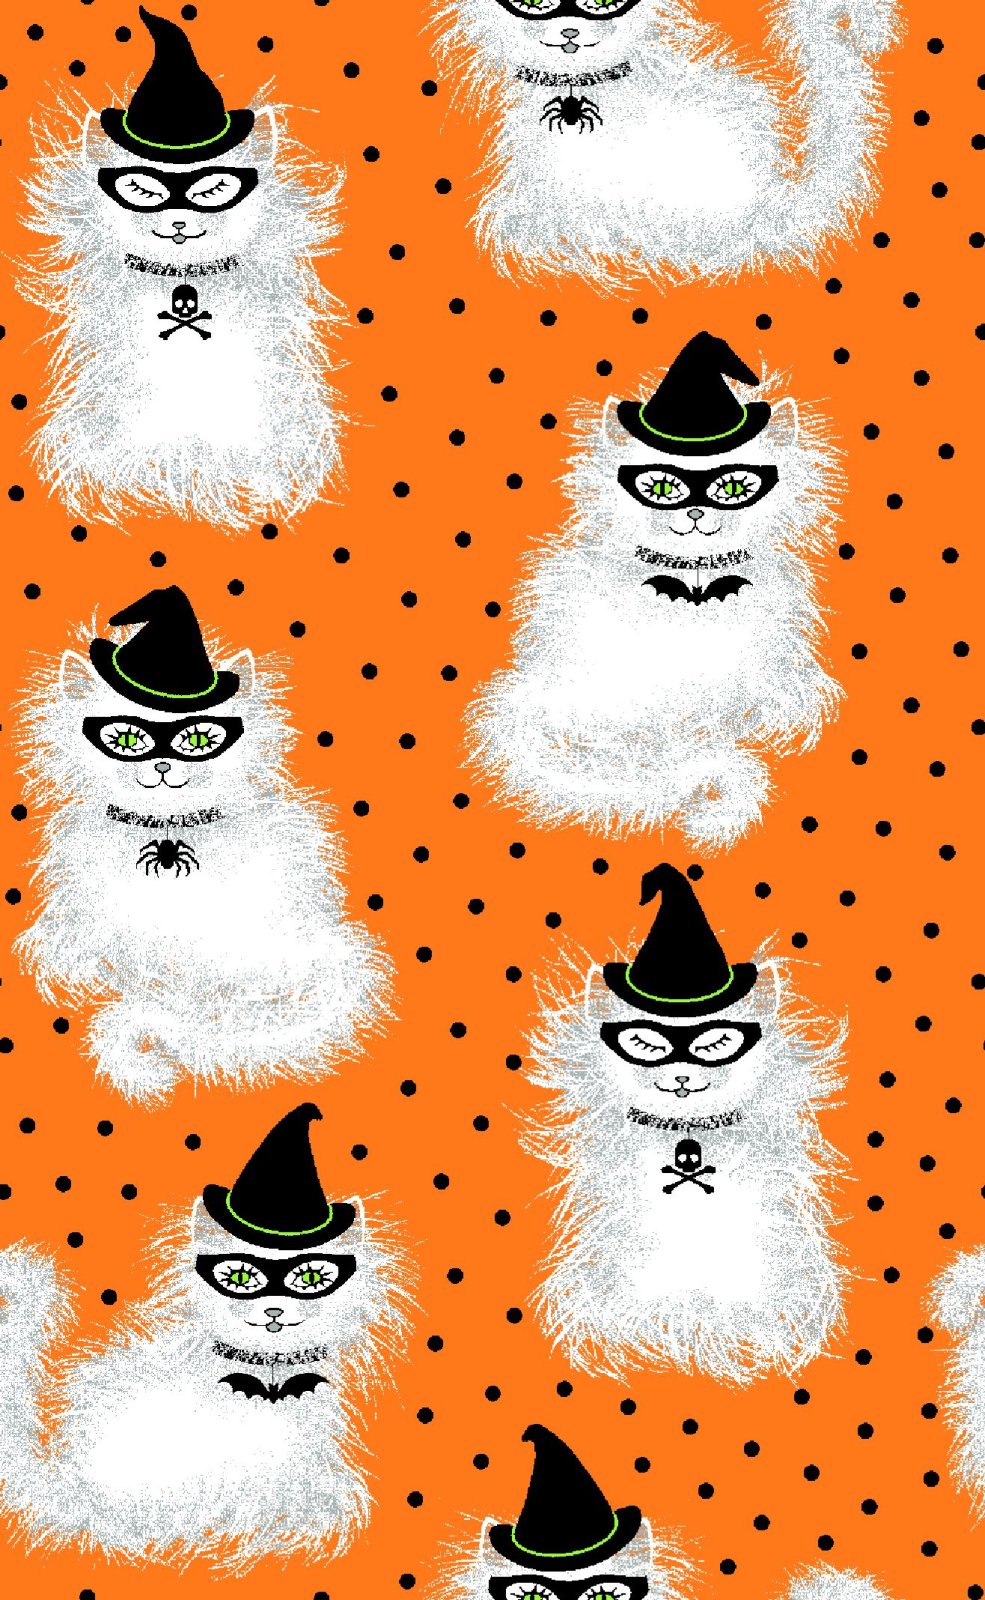 44 x 36 Halloween Spell on You Cats on Orange Fabric Traditions 100% Cotton